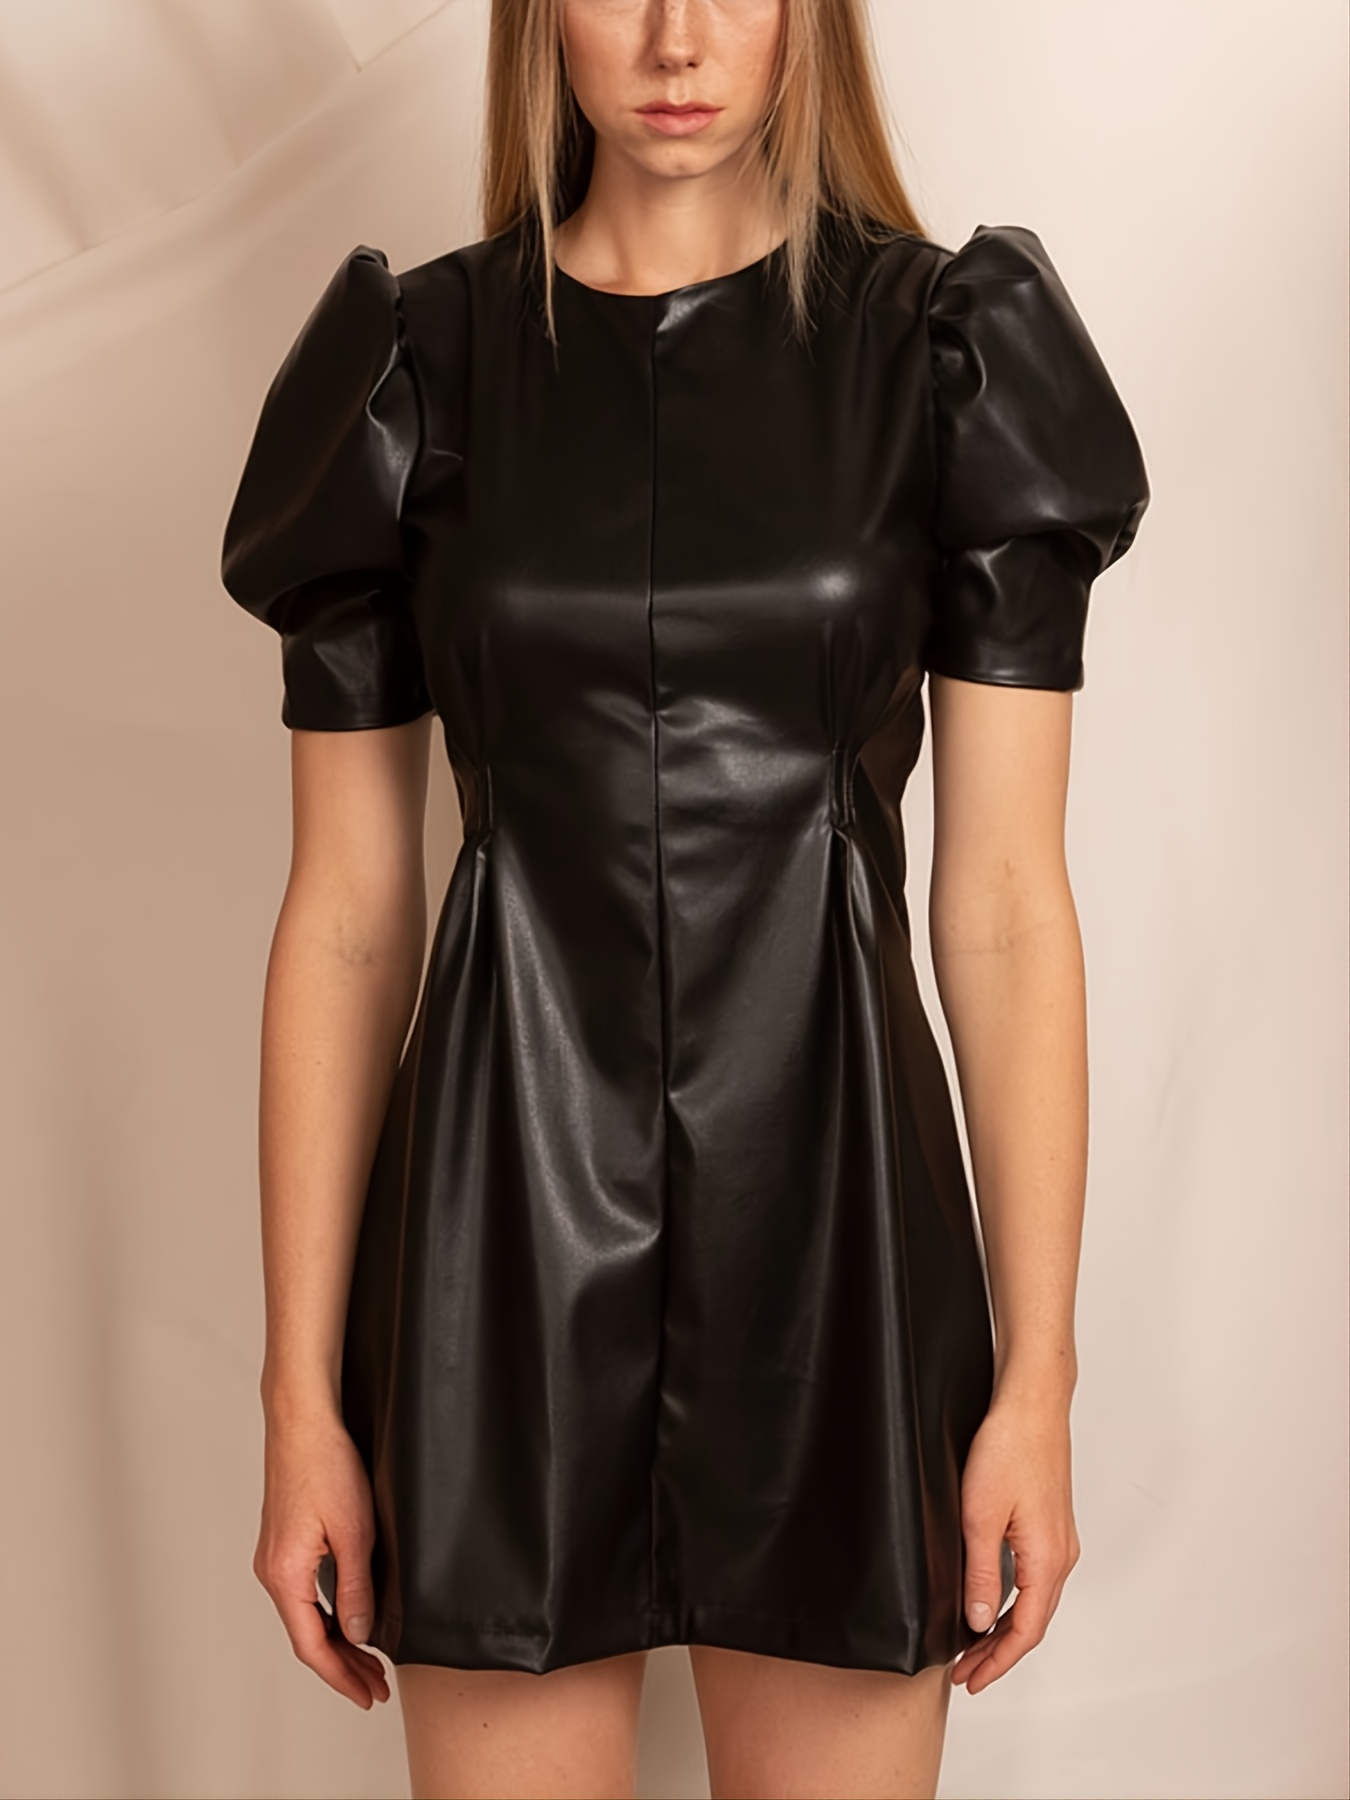 Leather Look Dresses, Faux Leather & PU Dresses